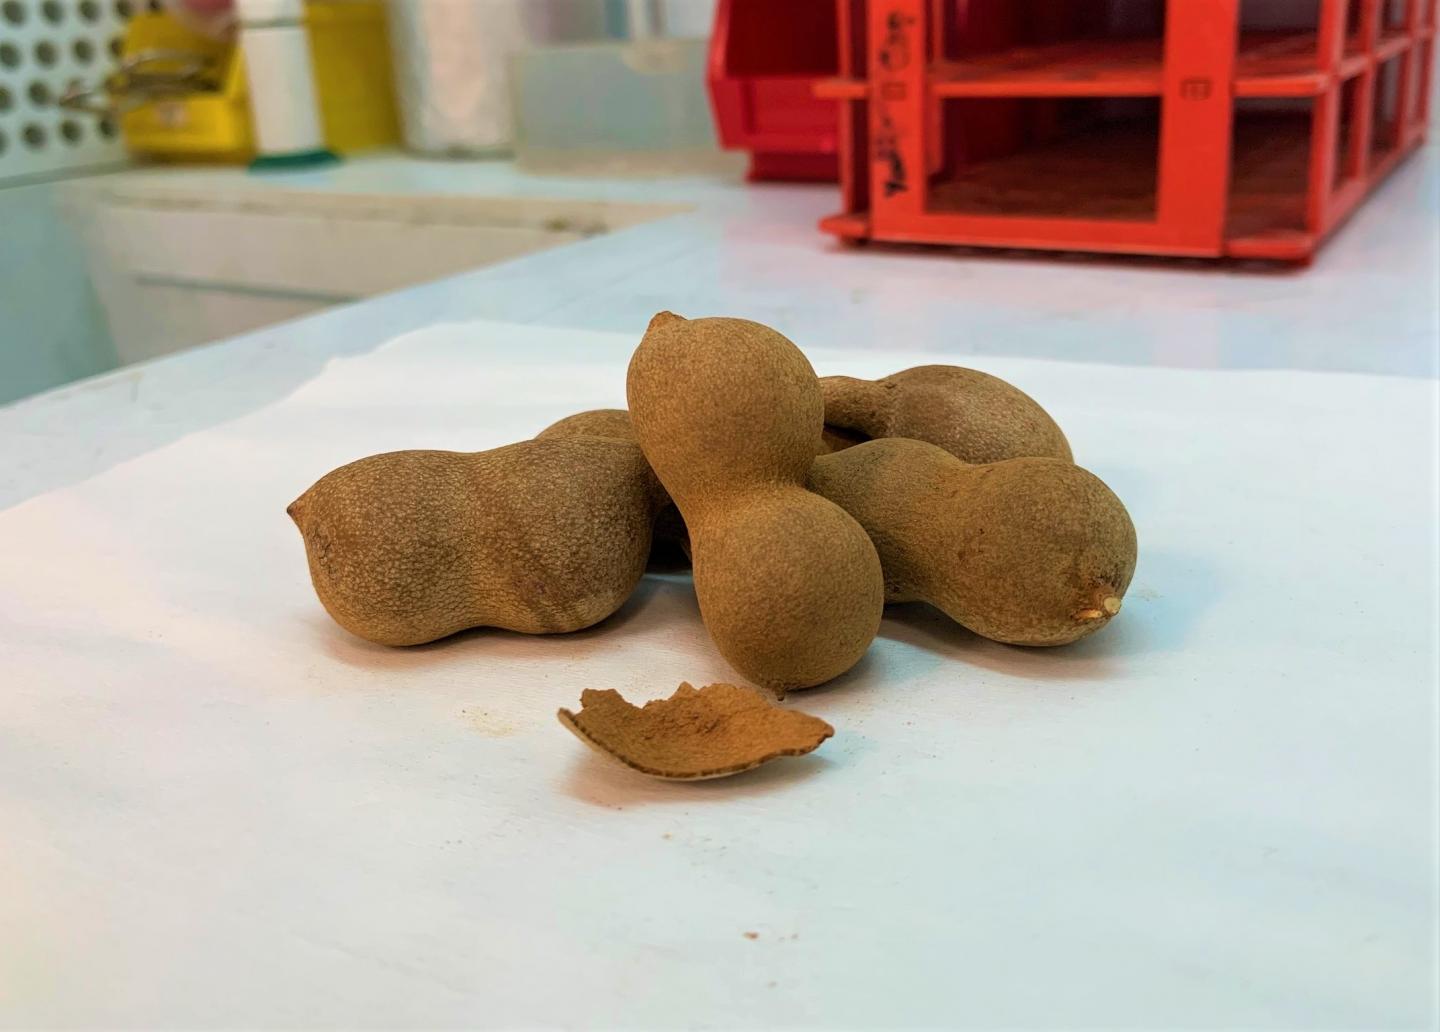 NTU Singapore converts tamarind shells into an energy source for vehicles